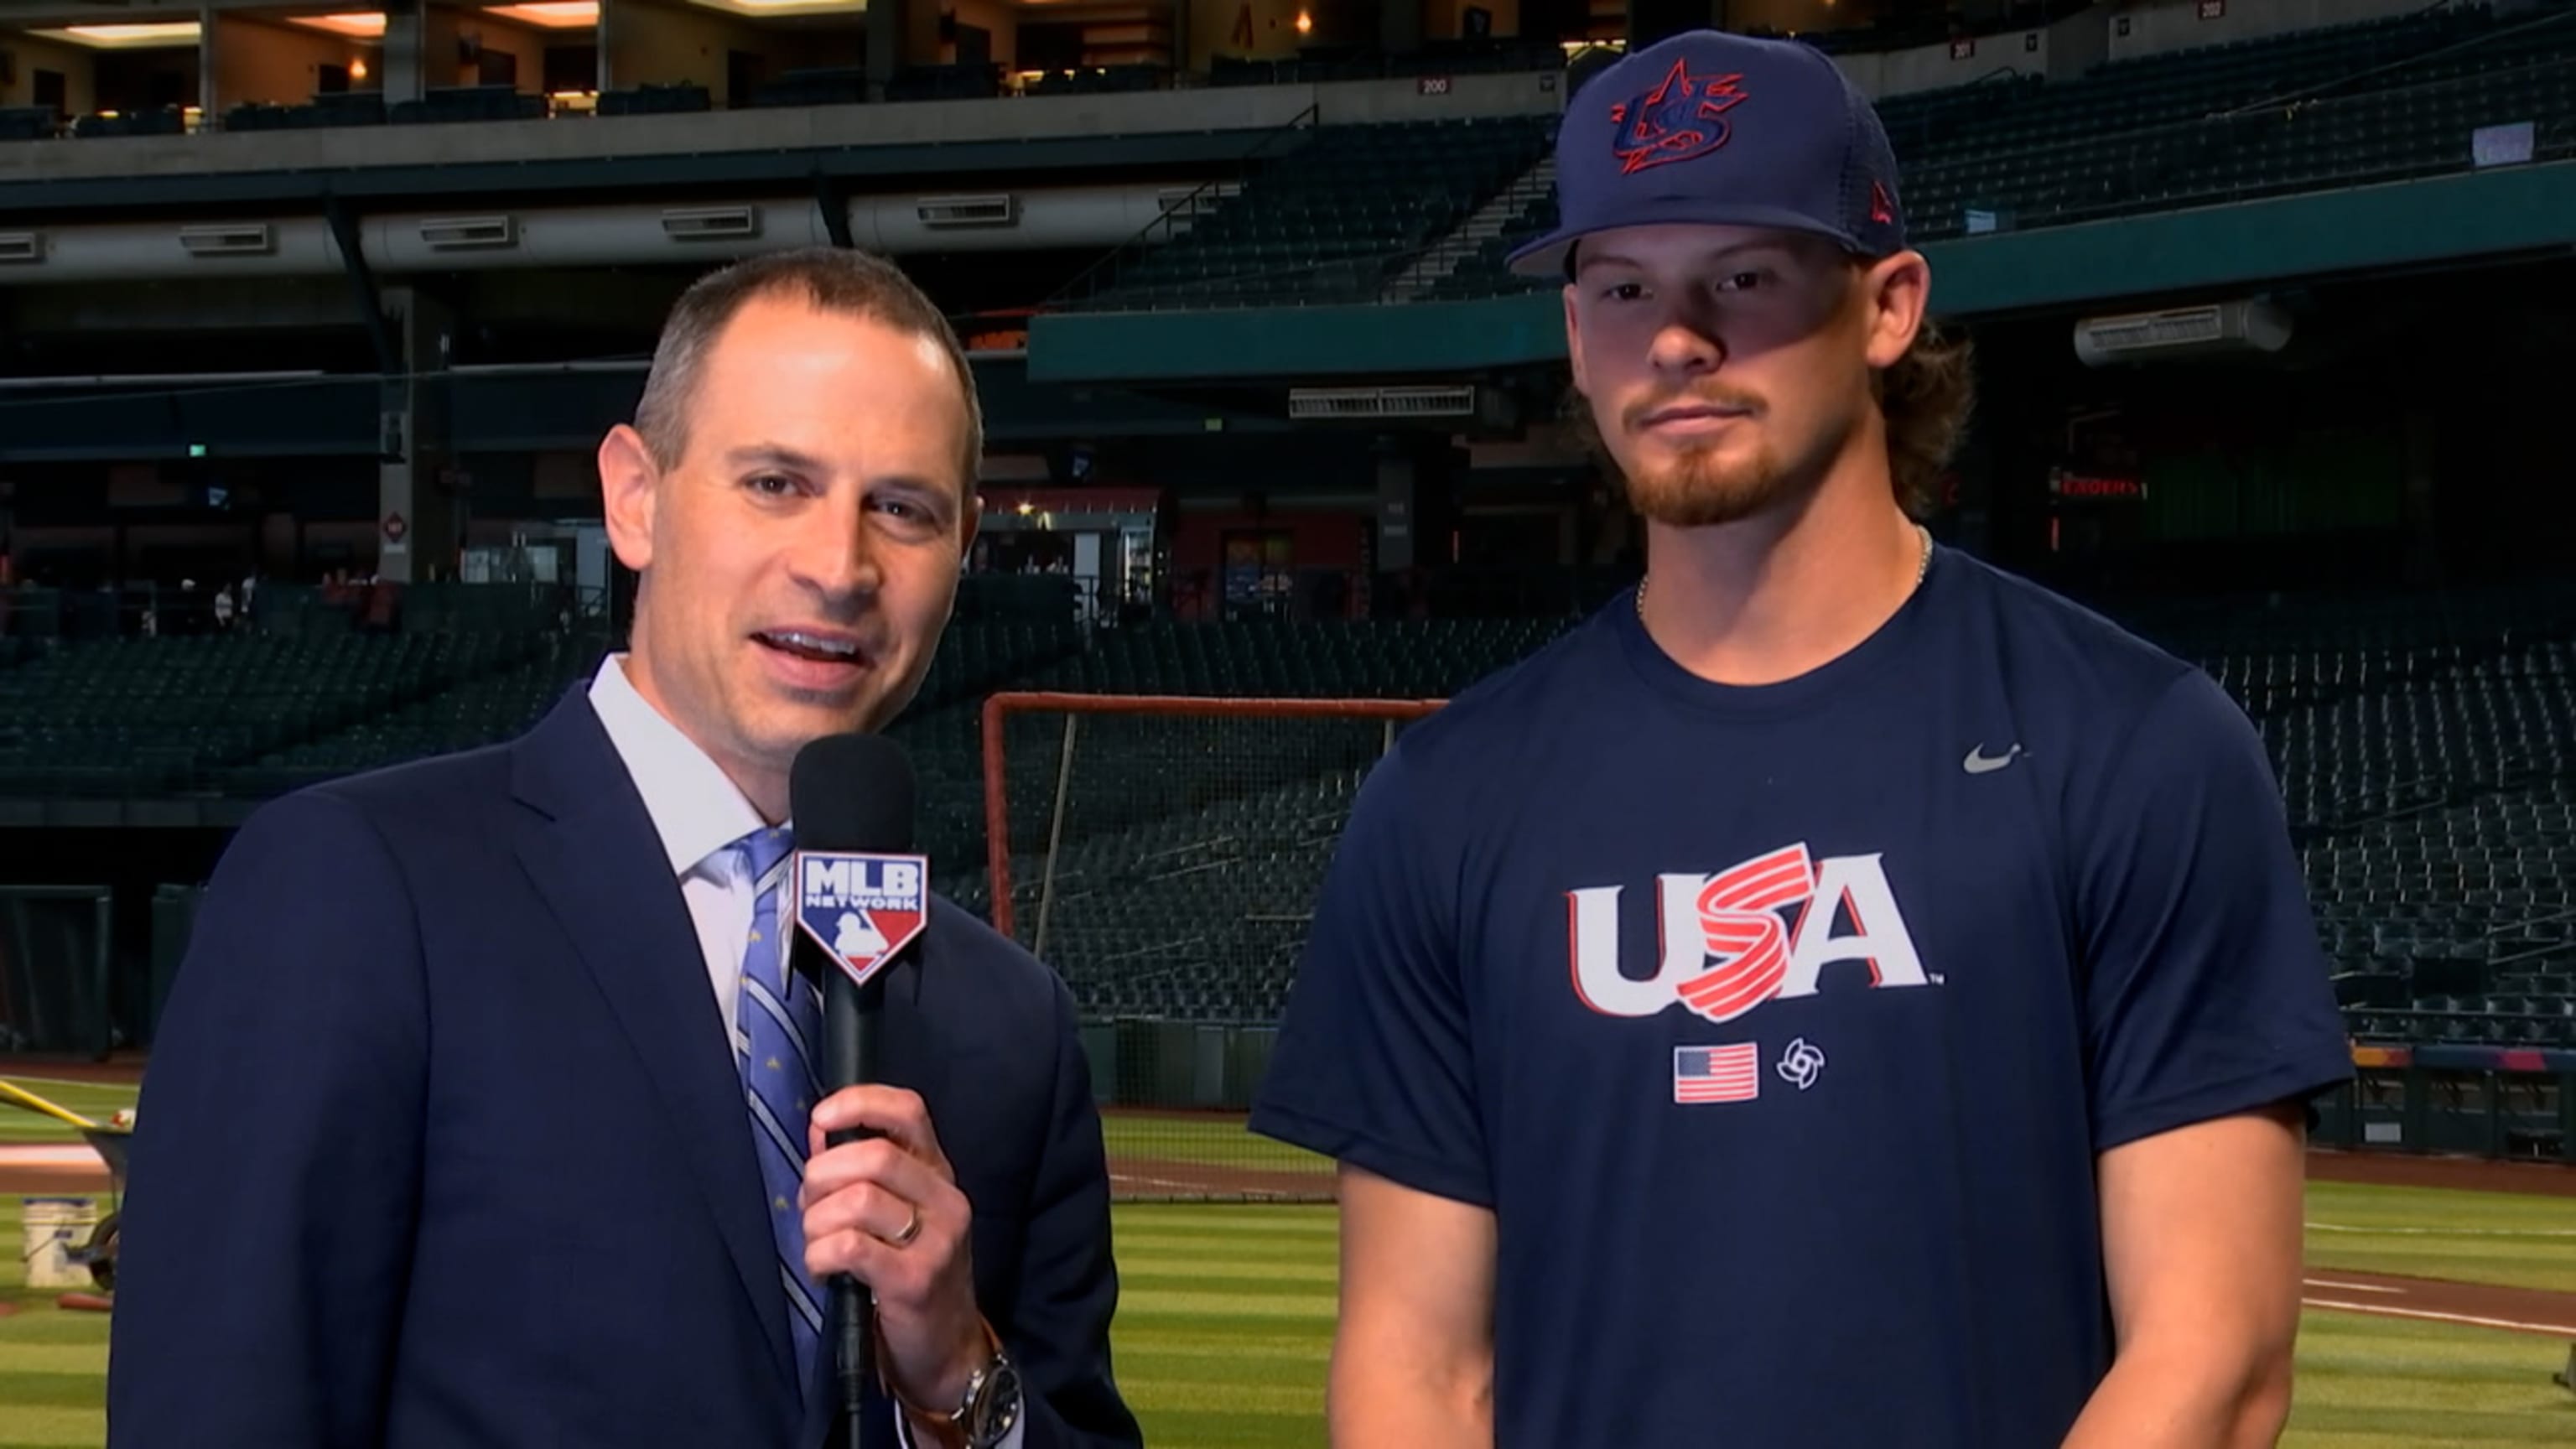 Bobby Witt Jr. fitting right in as Team USA's youngest talent at WBC  National News - Bally Sports